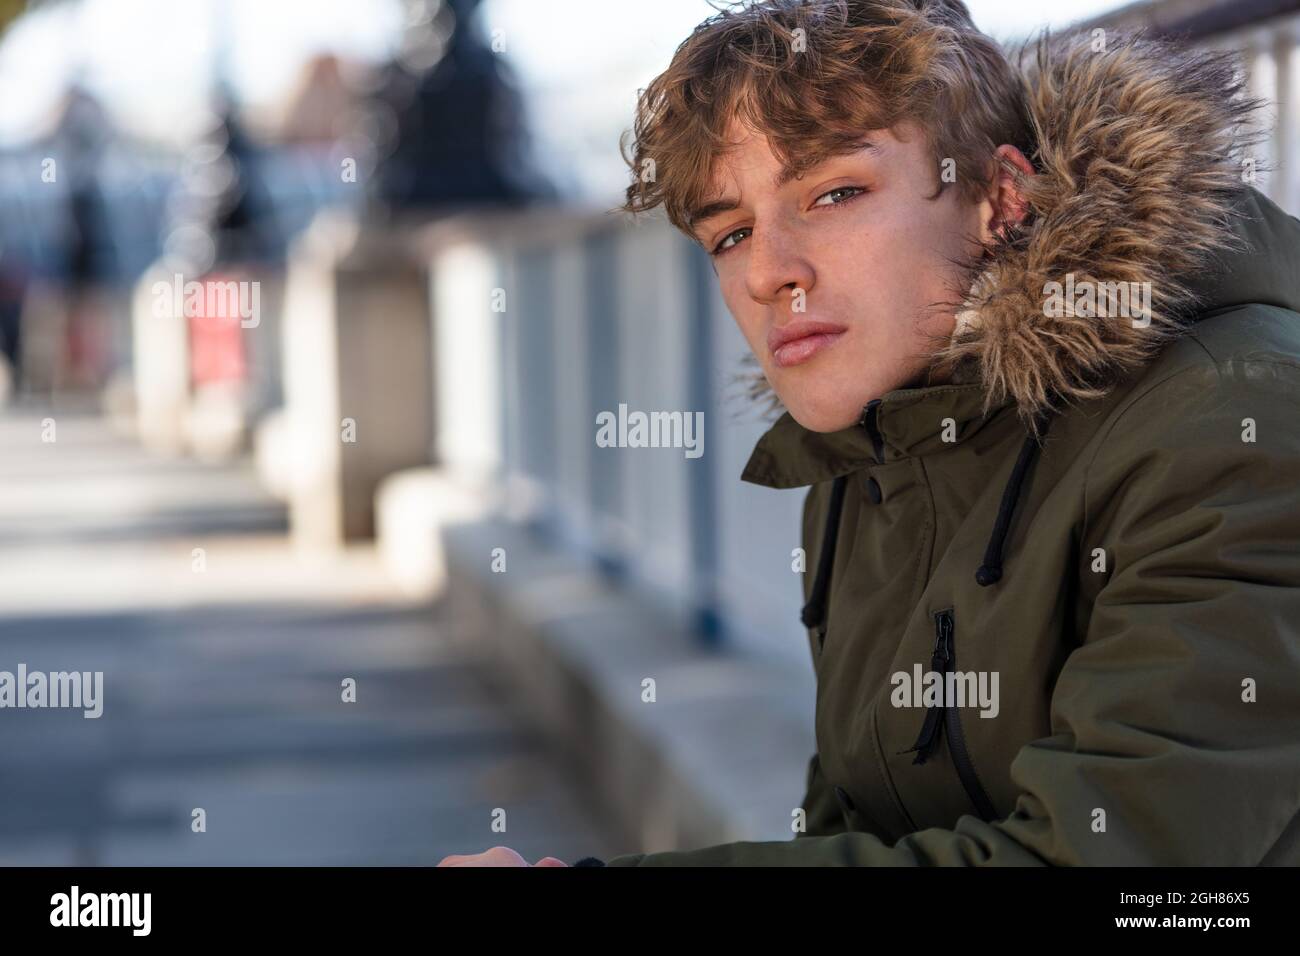 Male young adult teenager boy wearing a parka jacket outside in an urban city Stock Photo